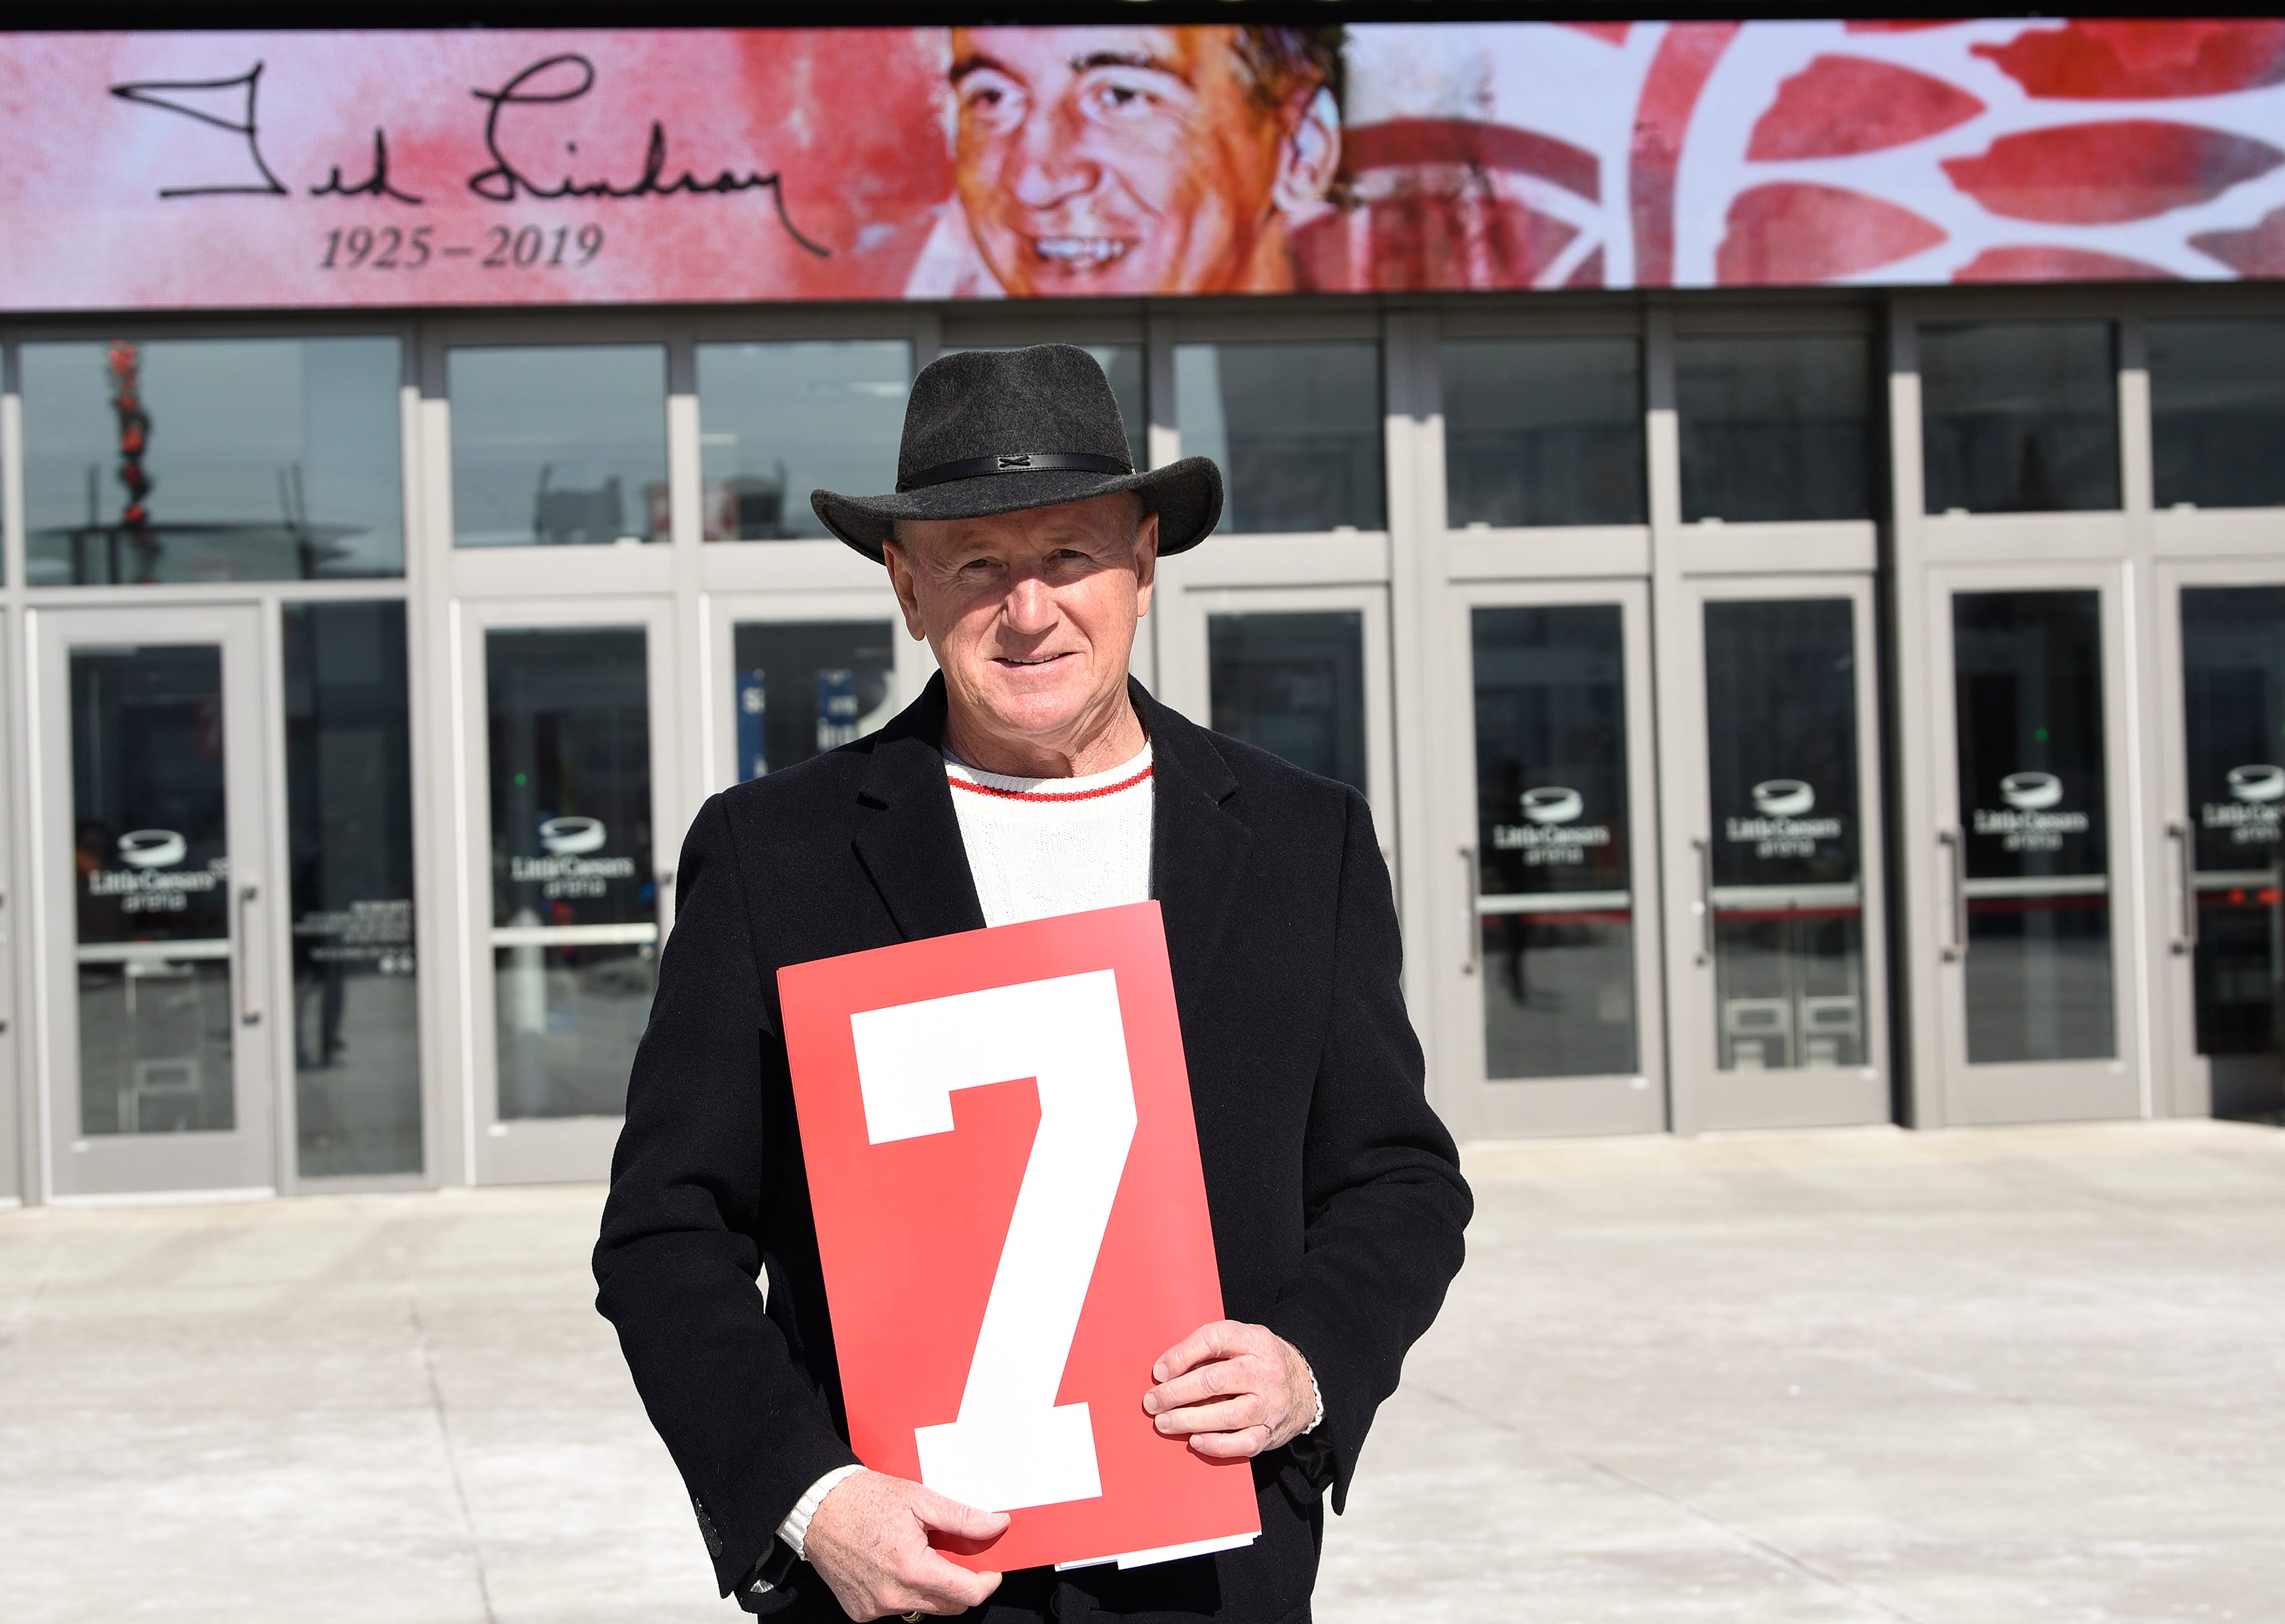 John Martin, 70, of Riverview stands in front of Little Caesars Arena holding a #7 placard in honor of Ted Lindsay.